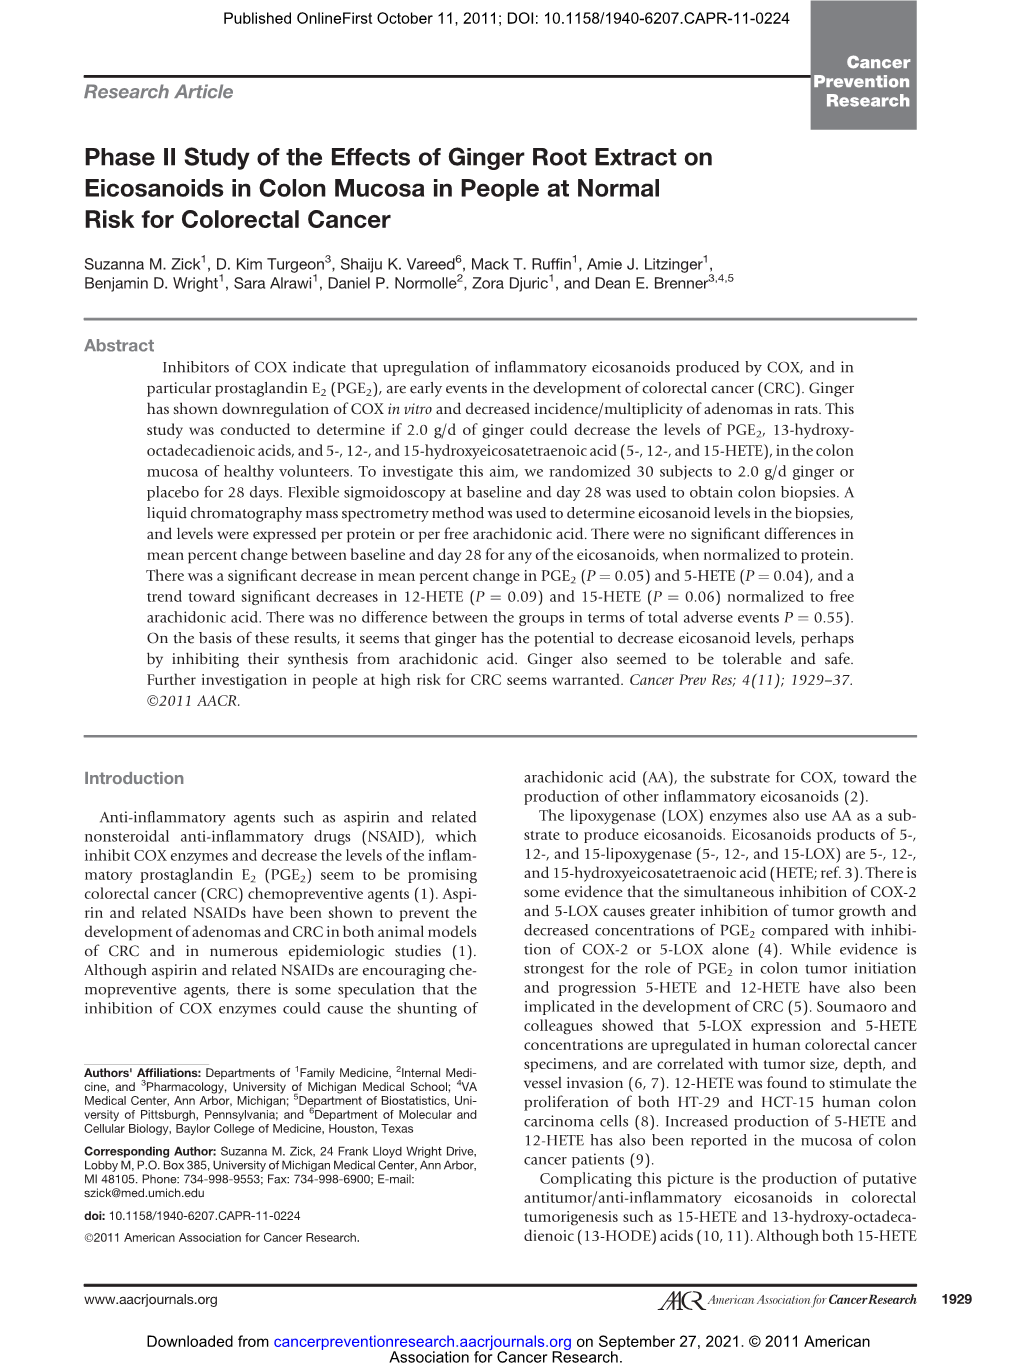 Phase II Study of the Effects of Ginger Root Extract on Eicosanoids in Colon Mucosa in People at Normal Risk for Colorectal Cancer